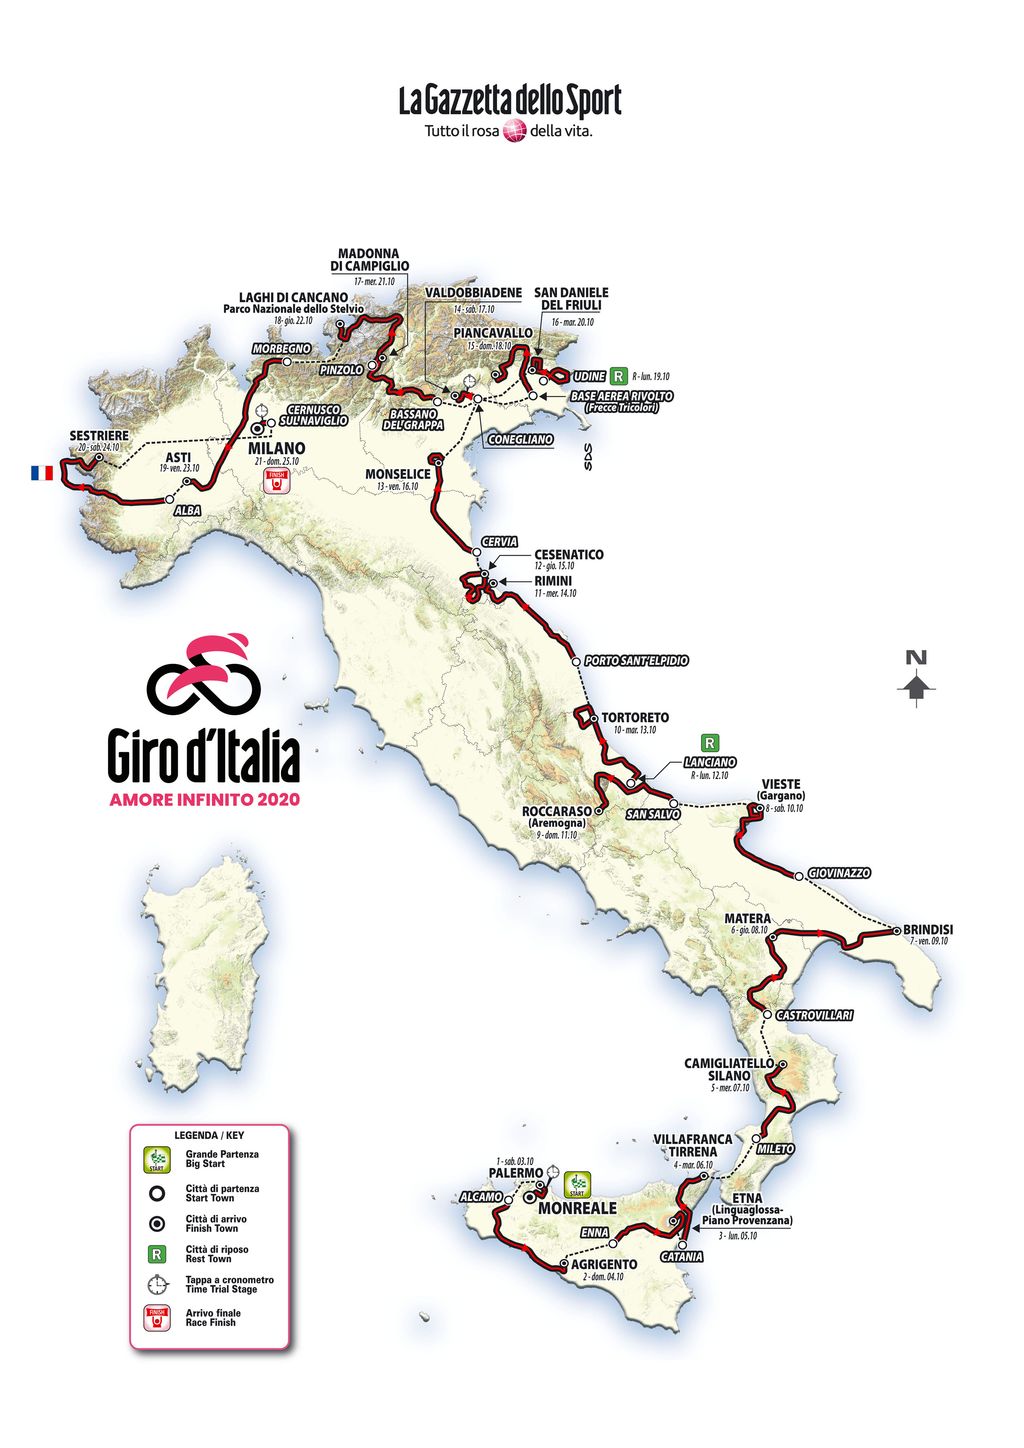 Revised 2020 Giro d'Italia route features additional summit finish at